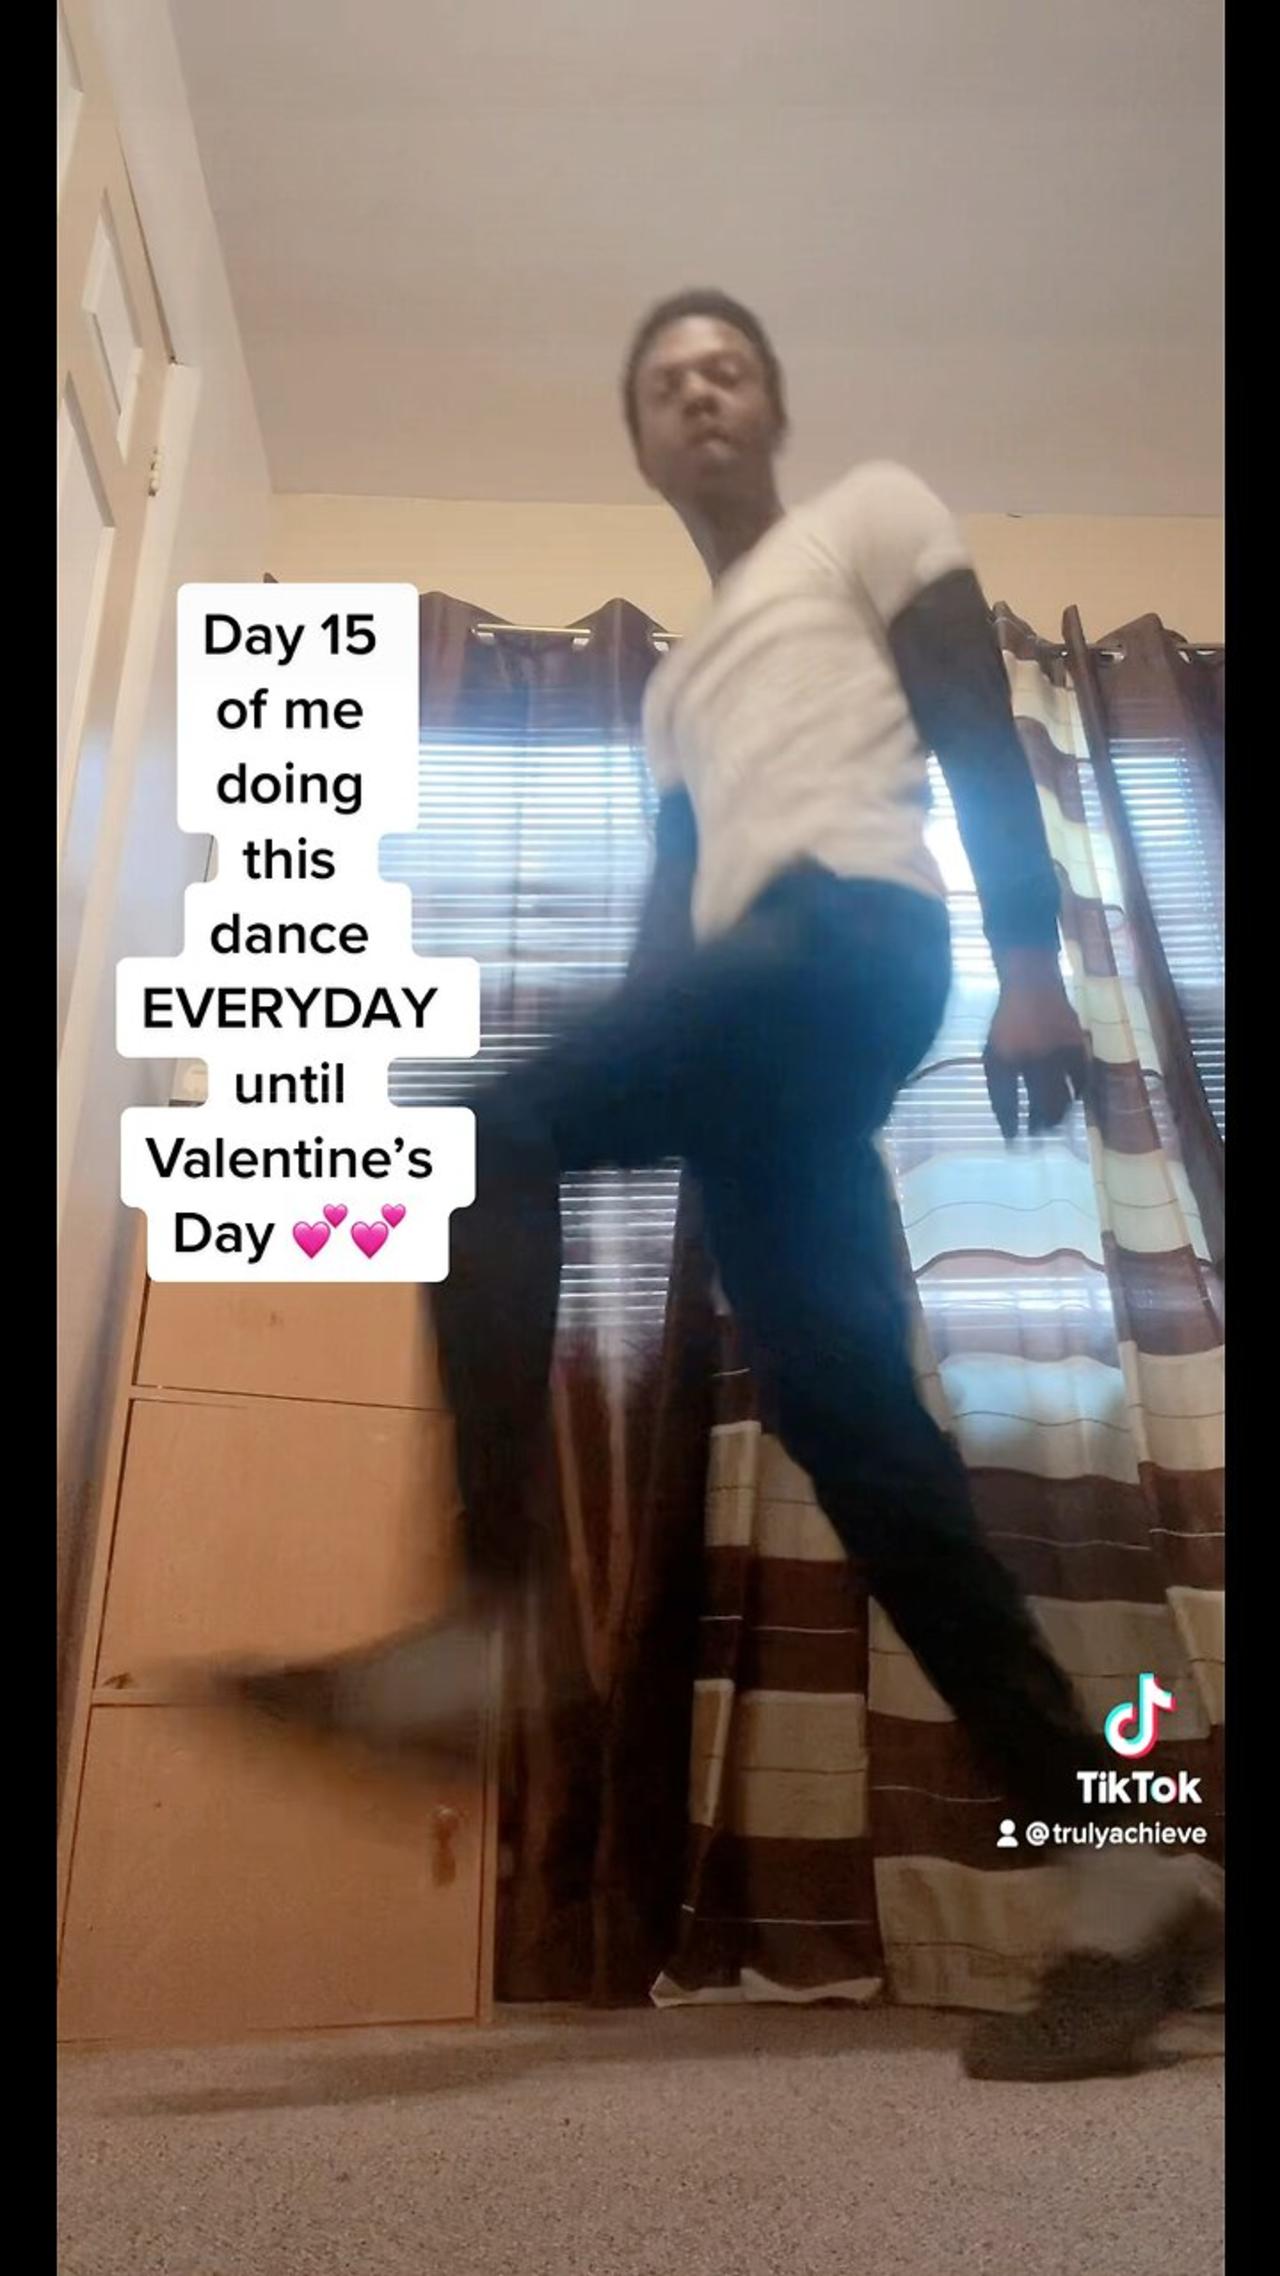 Day 15 of me doing this TikTok dance EVERYDAY until Valentine’s Day